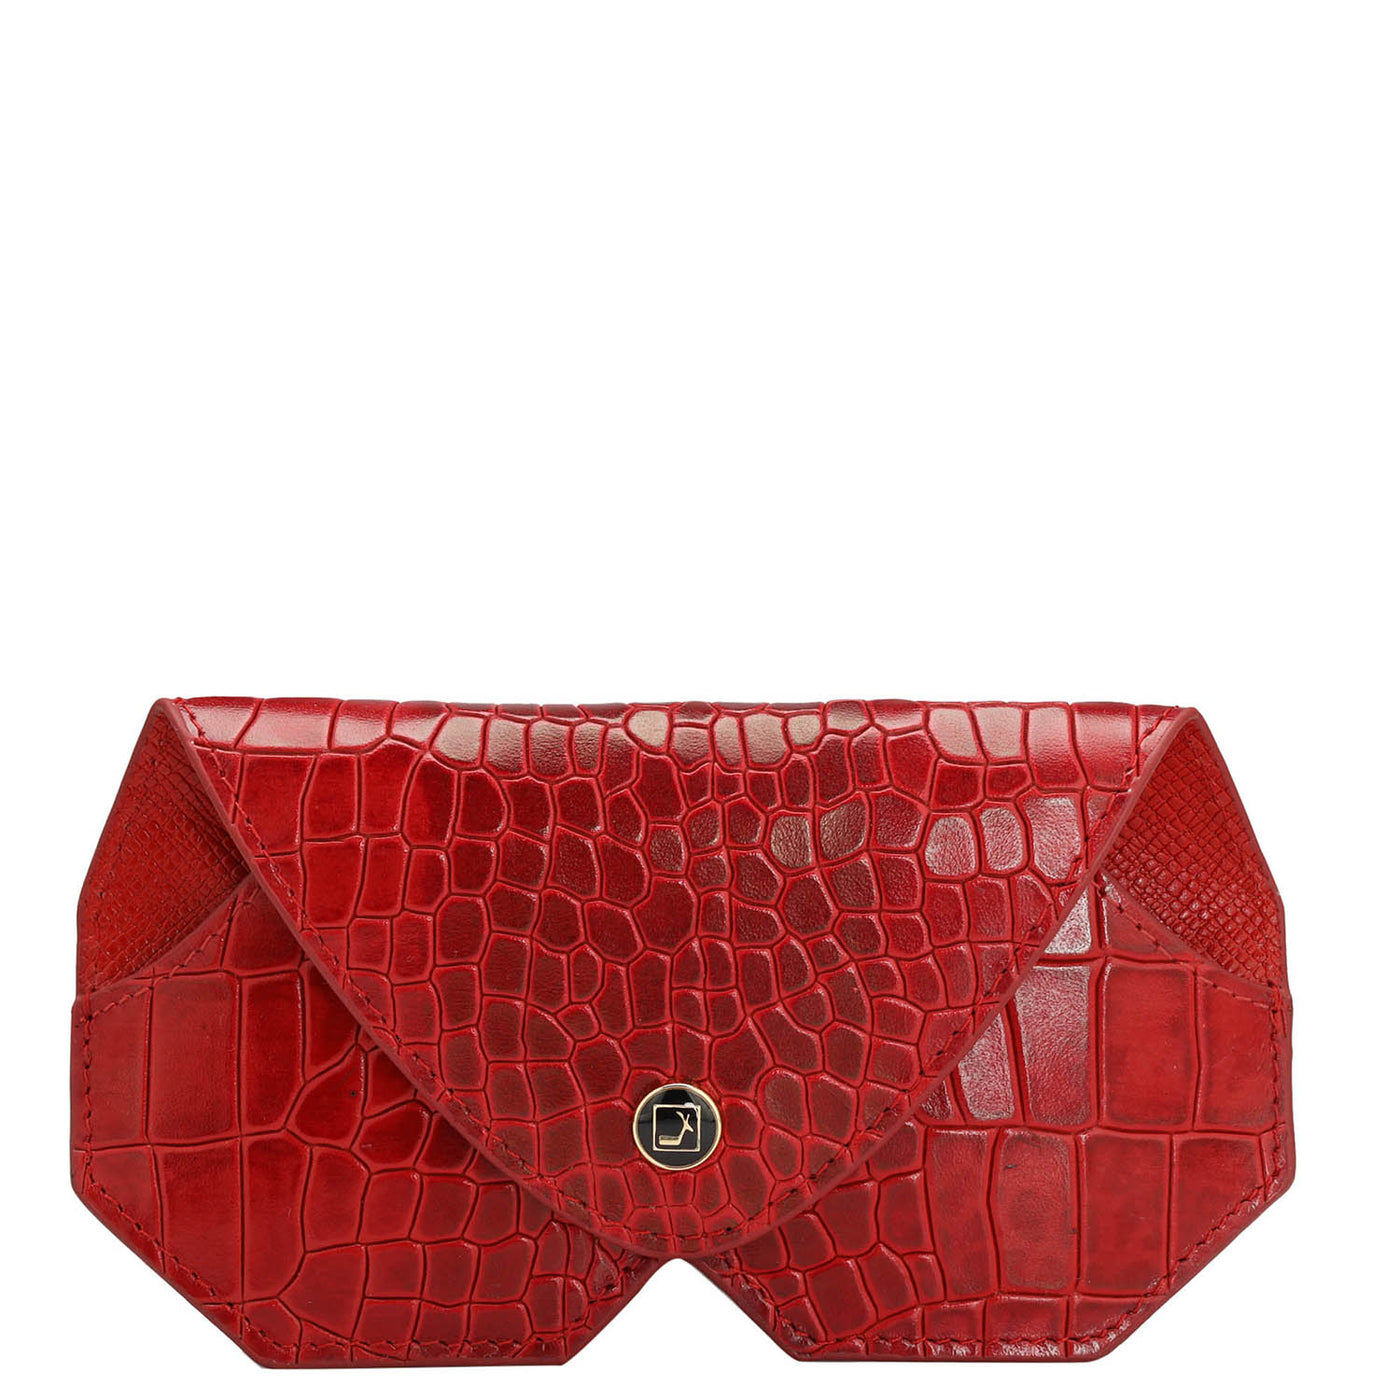 Croco Leather Spectacle Case - Tomato